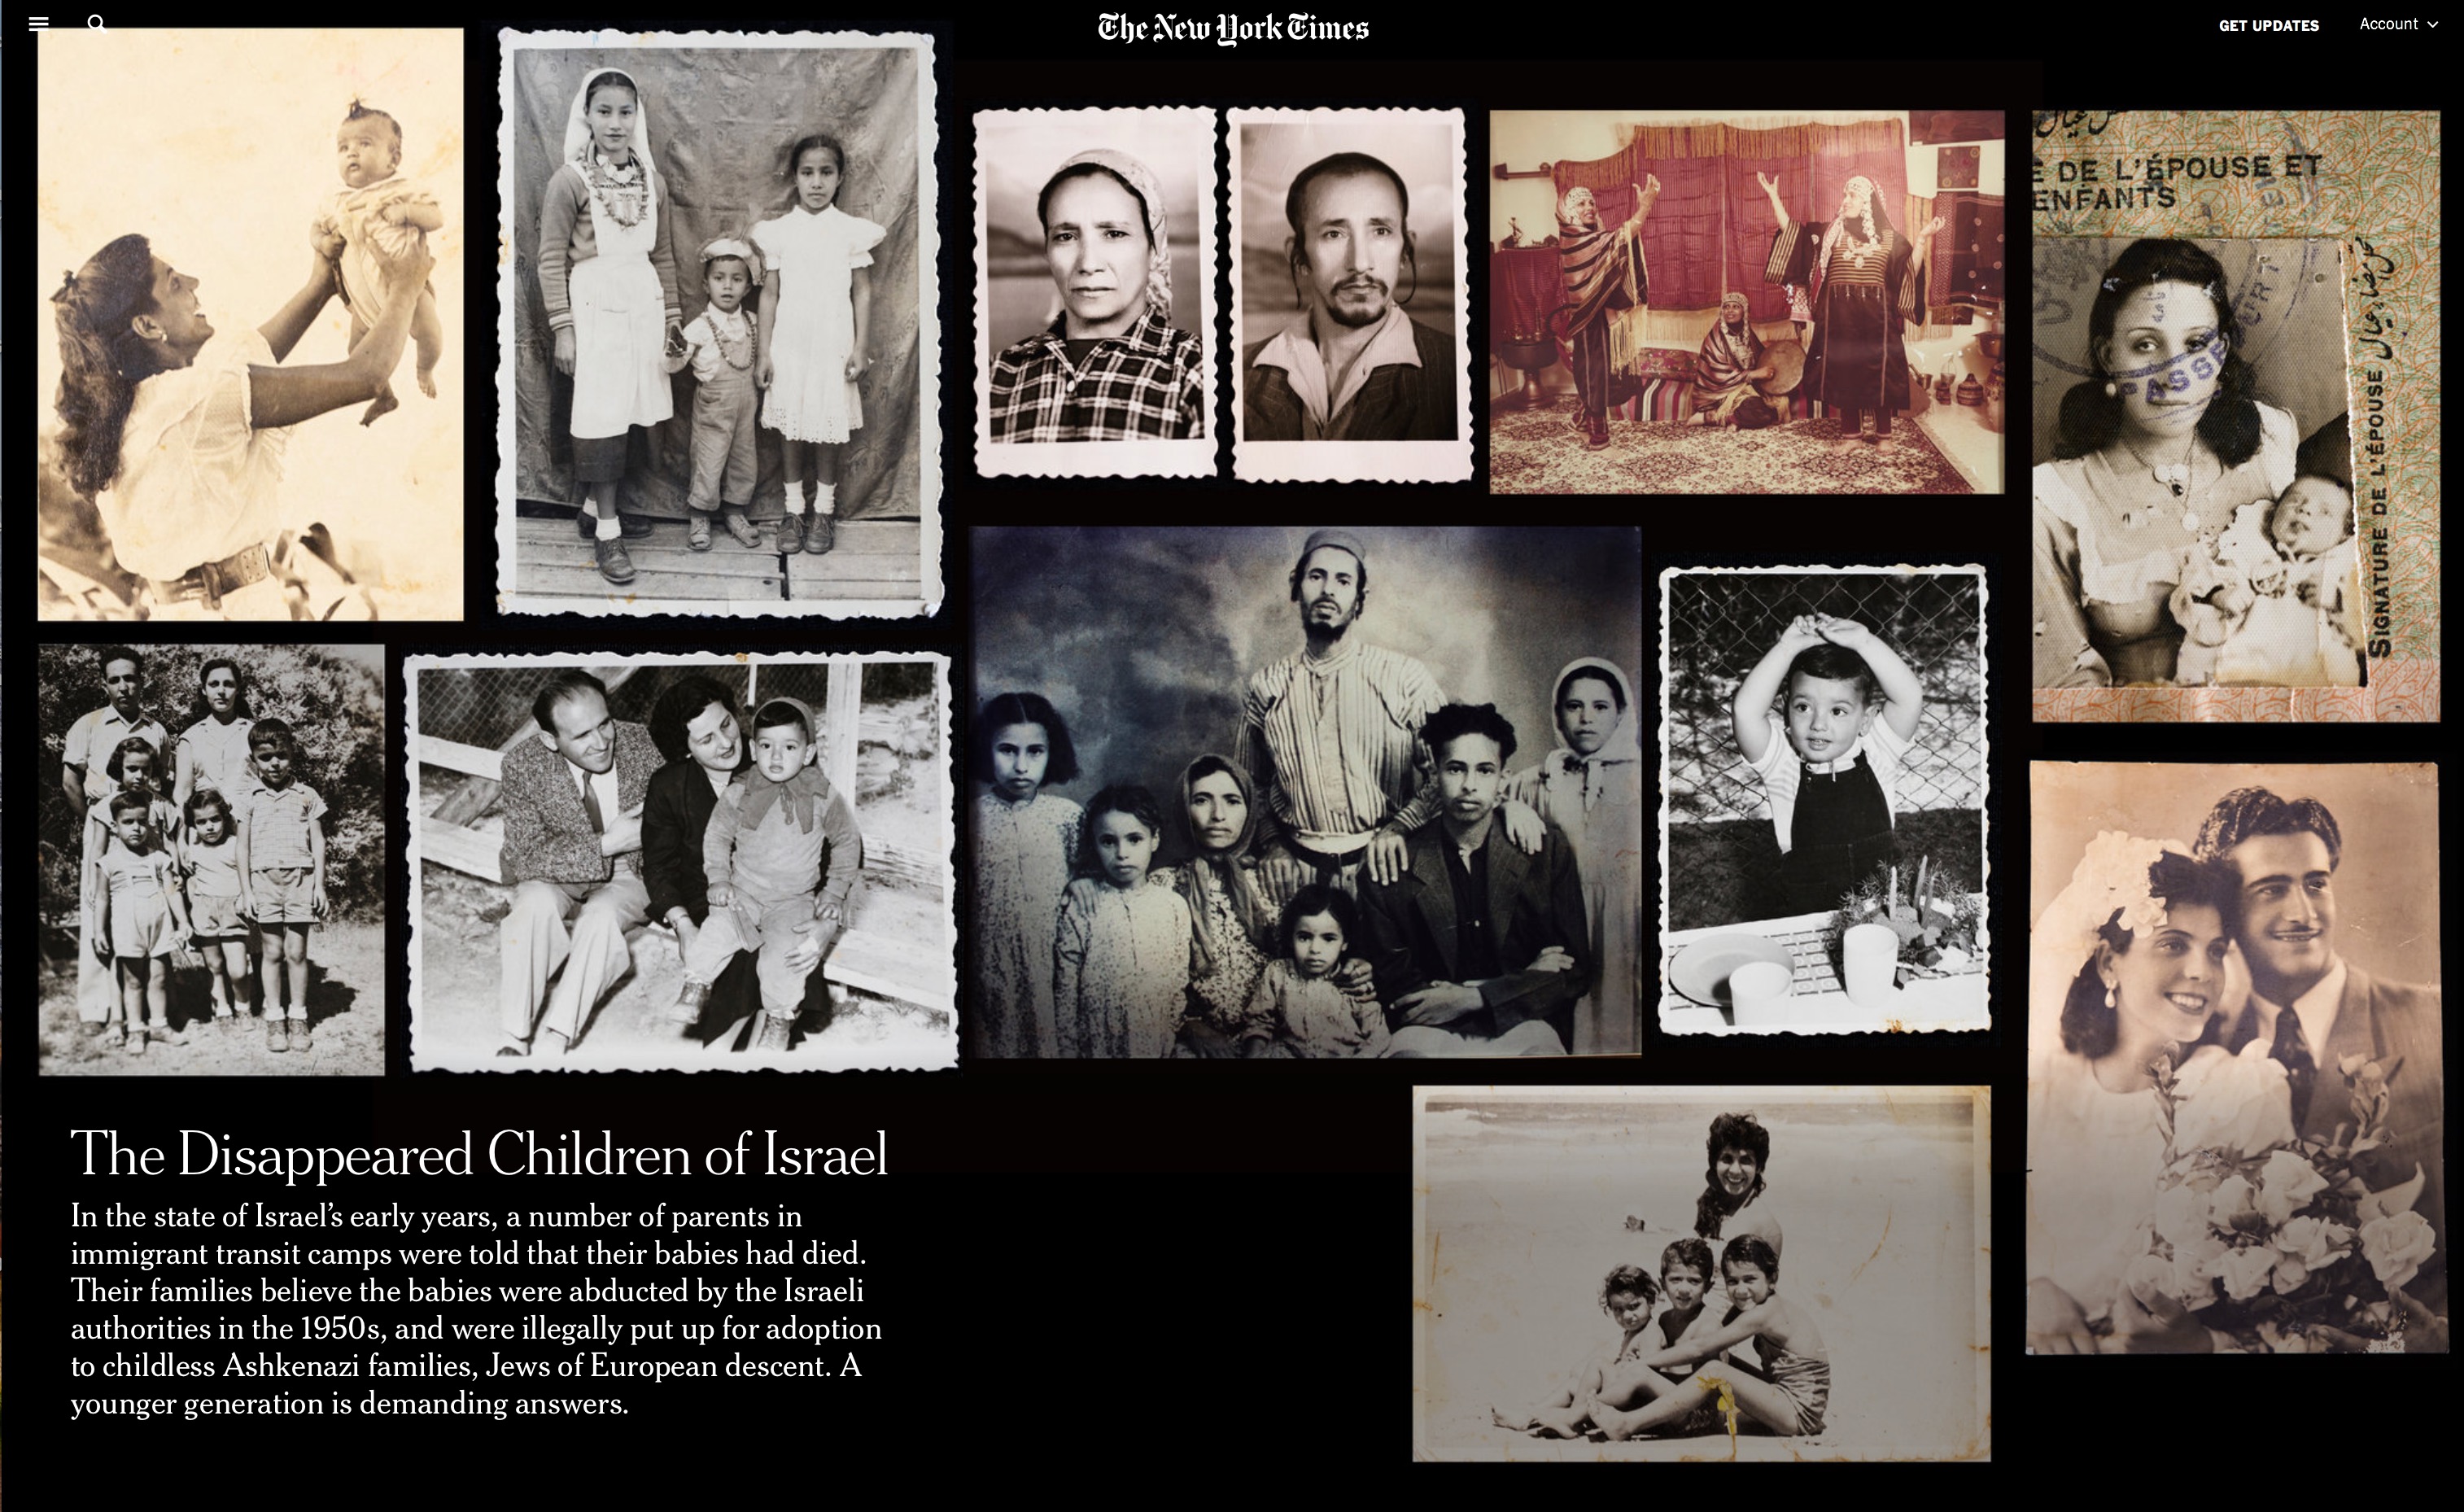 New York Times article - "The Disappeared Children of Israel"